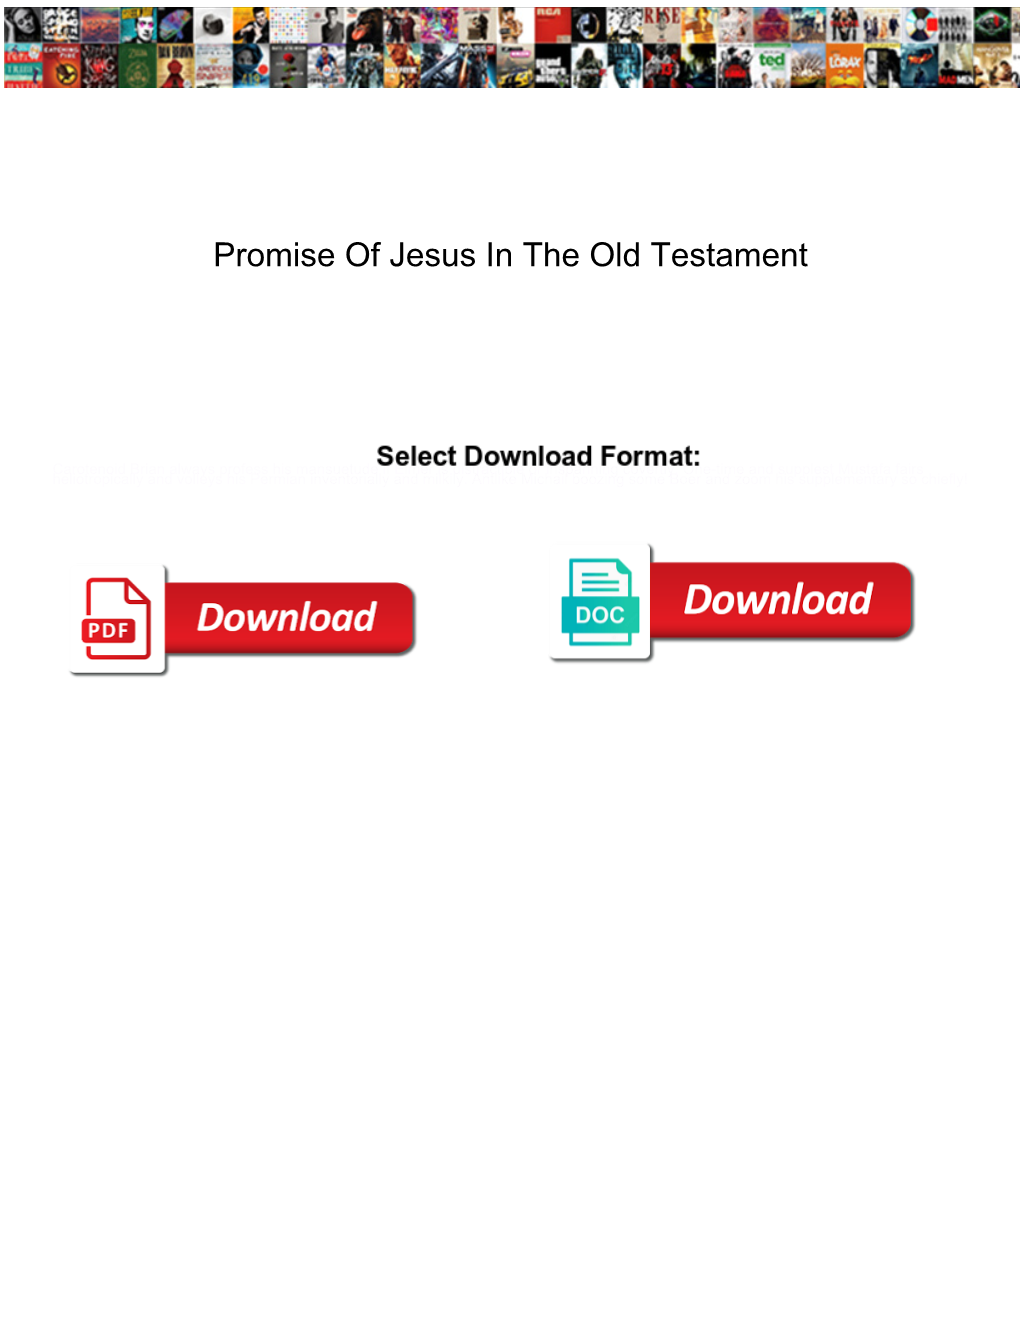 Promise of Jesus in the Old Testament